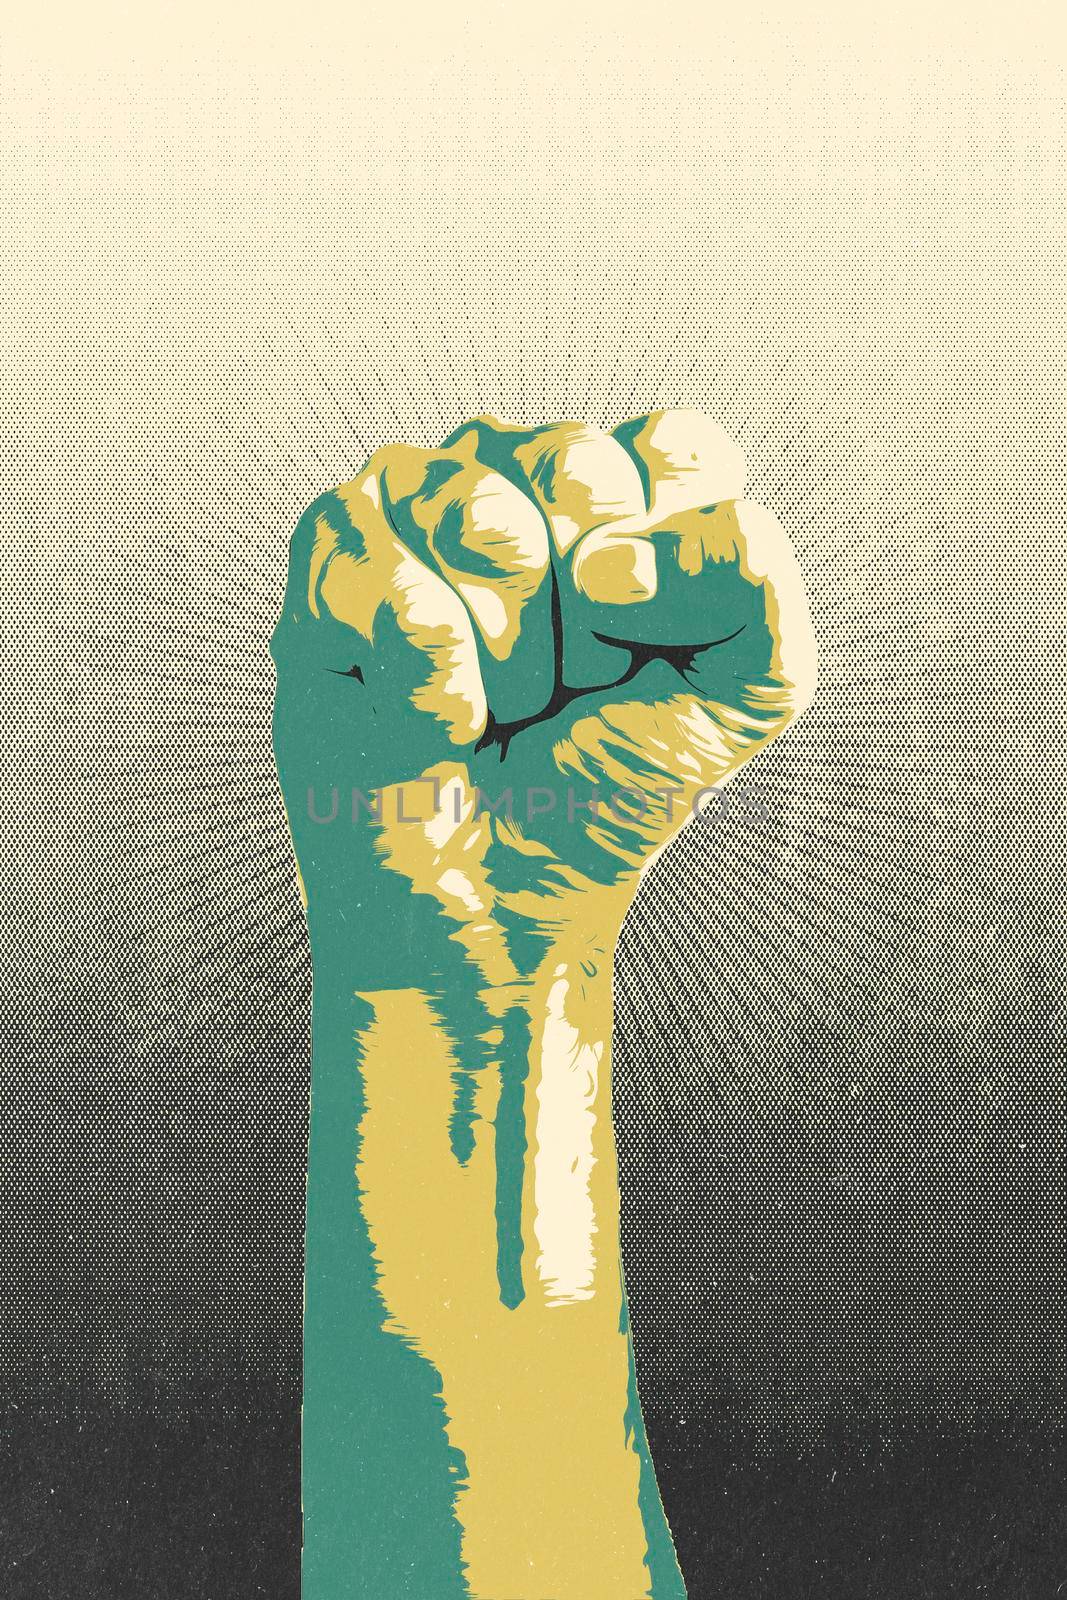 Raised fist concept. Digital draw of a man closed fist by bepsimage